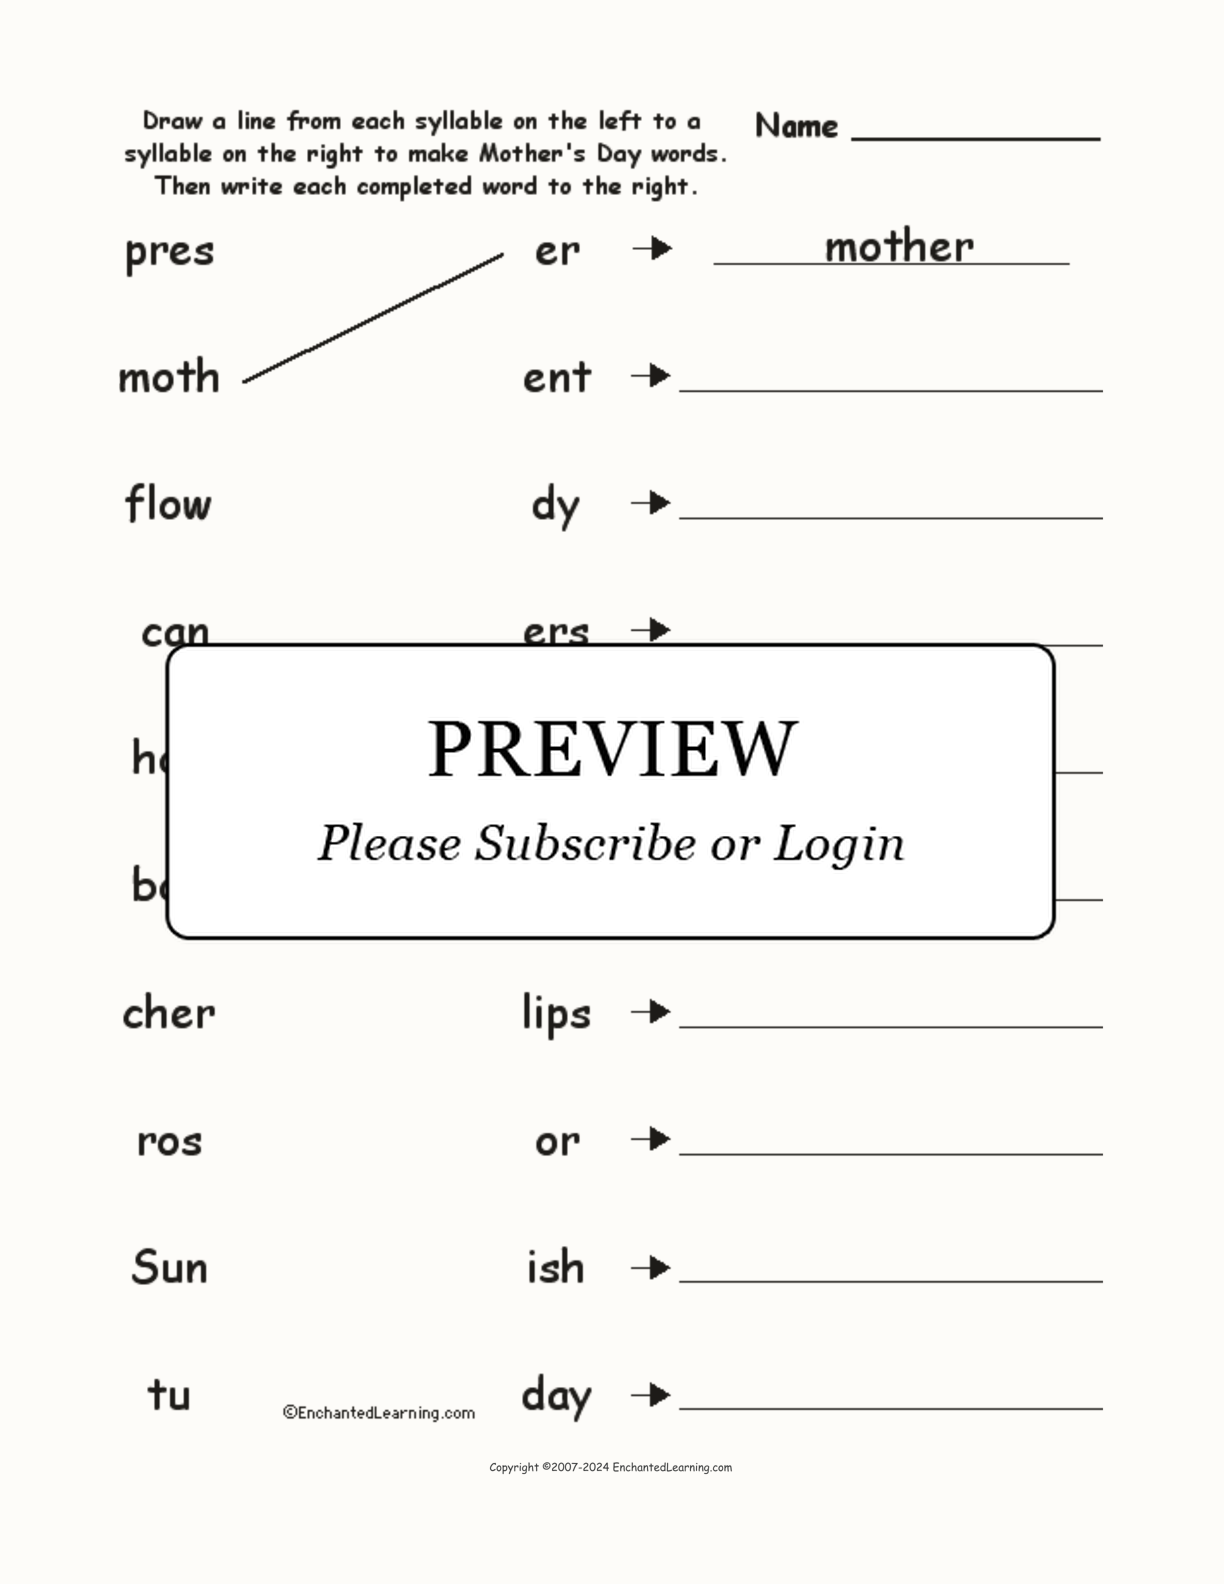 Match the Syllables: Mother's Day Words interactive worksheet page 1